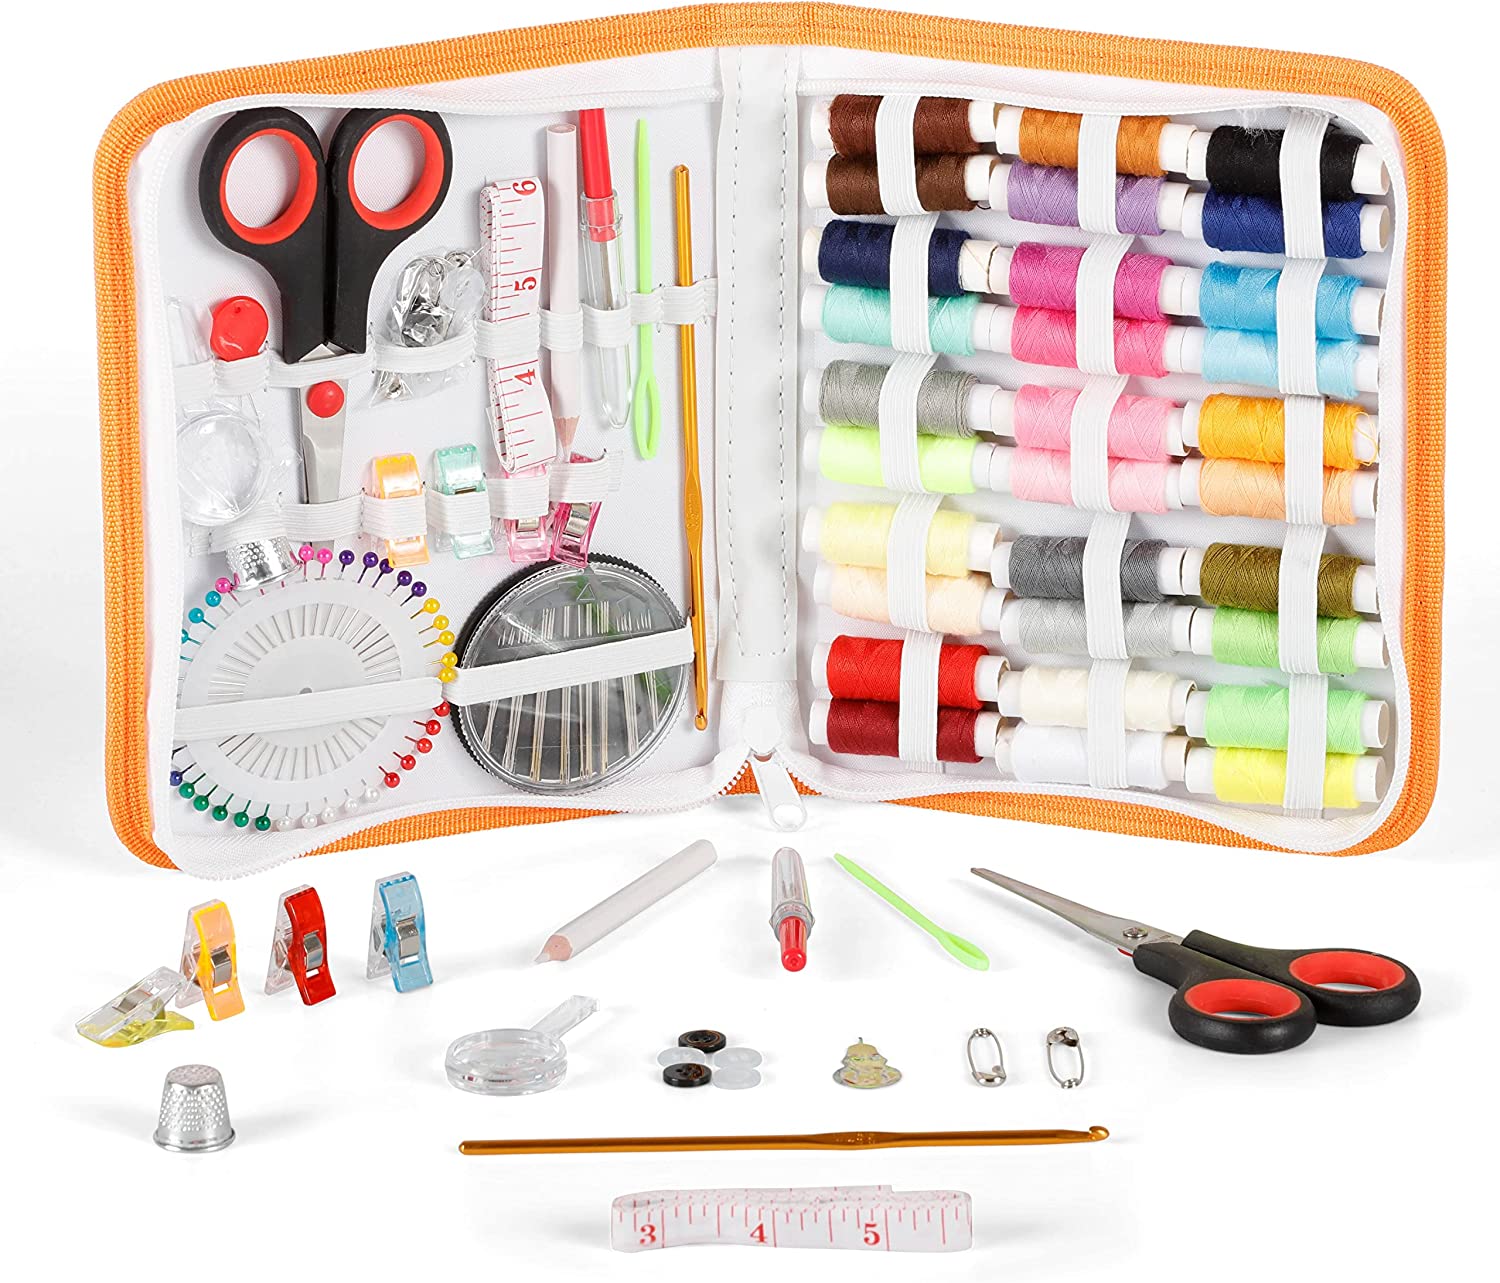 Incraftables Sewing Kit with 30pcs Multicolor Thread & Needles. Best  Emergency Travel Hand Repair Set w/ Scissors, Tape Measure, Thimble, Wonder  clips, Buttons, Seam ripper, Pencil, Safety Pins & More